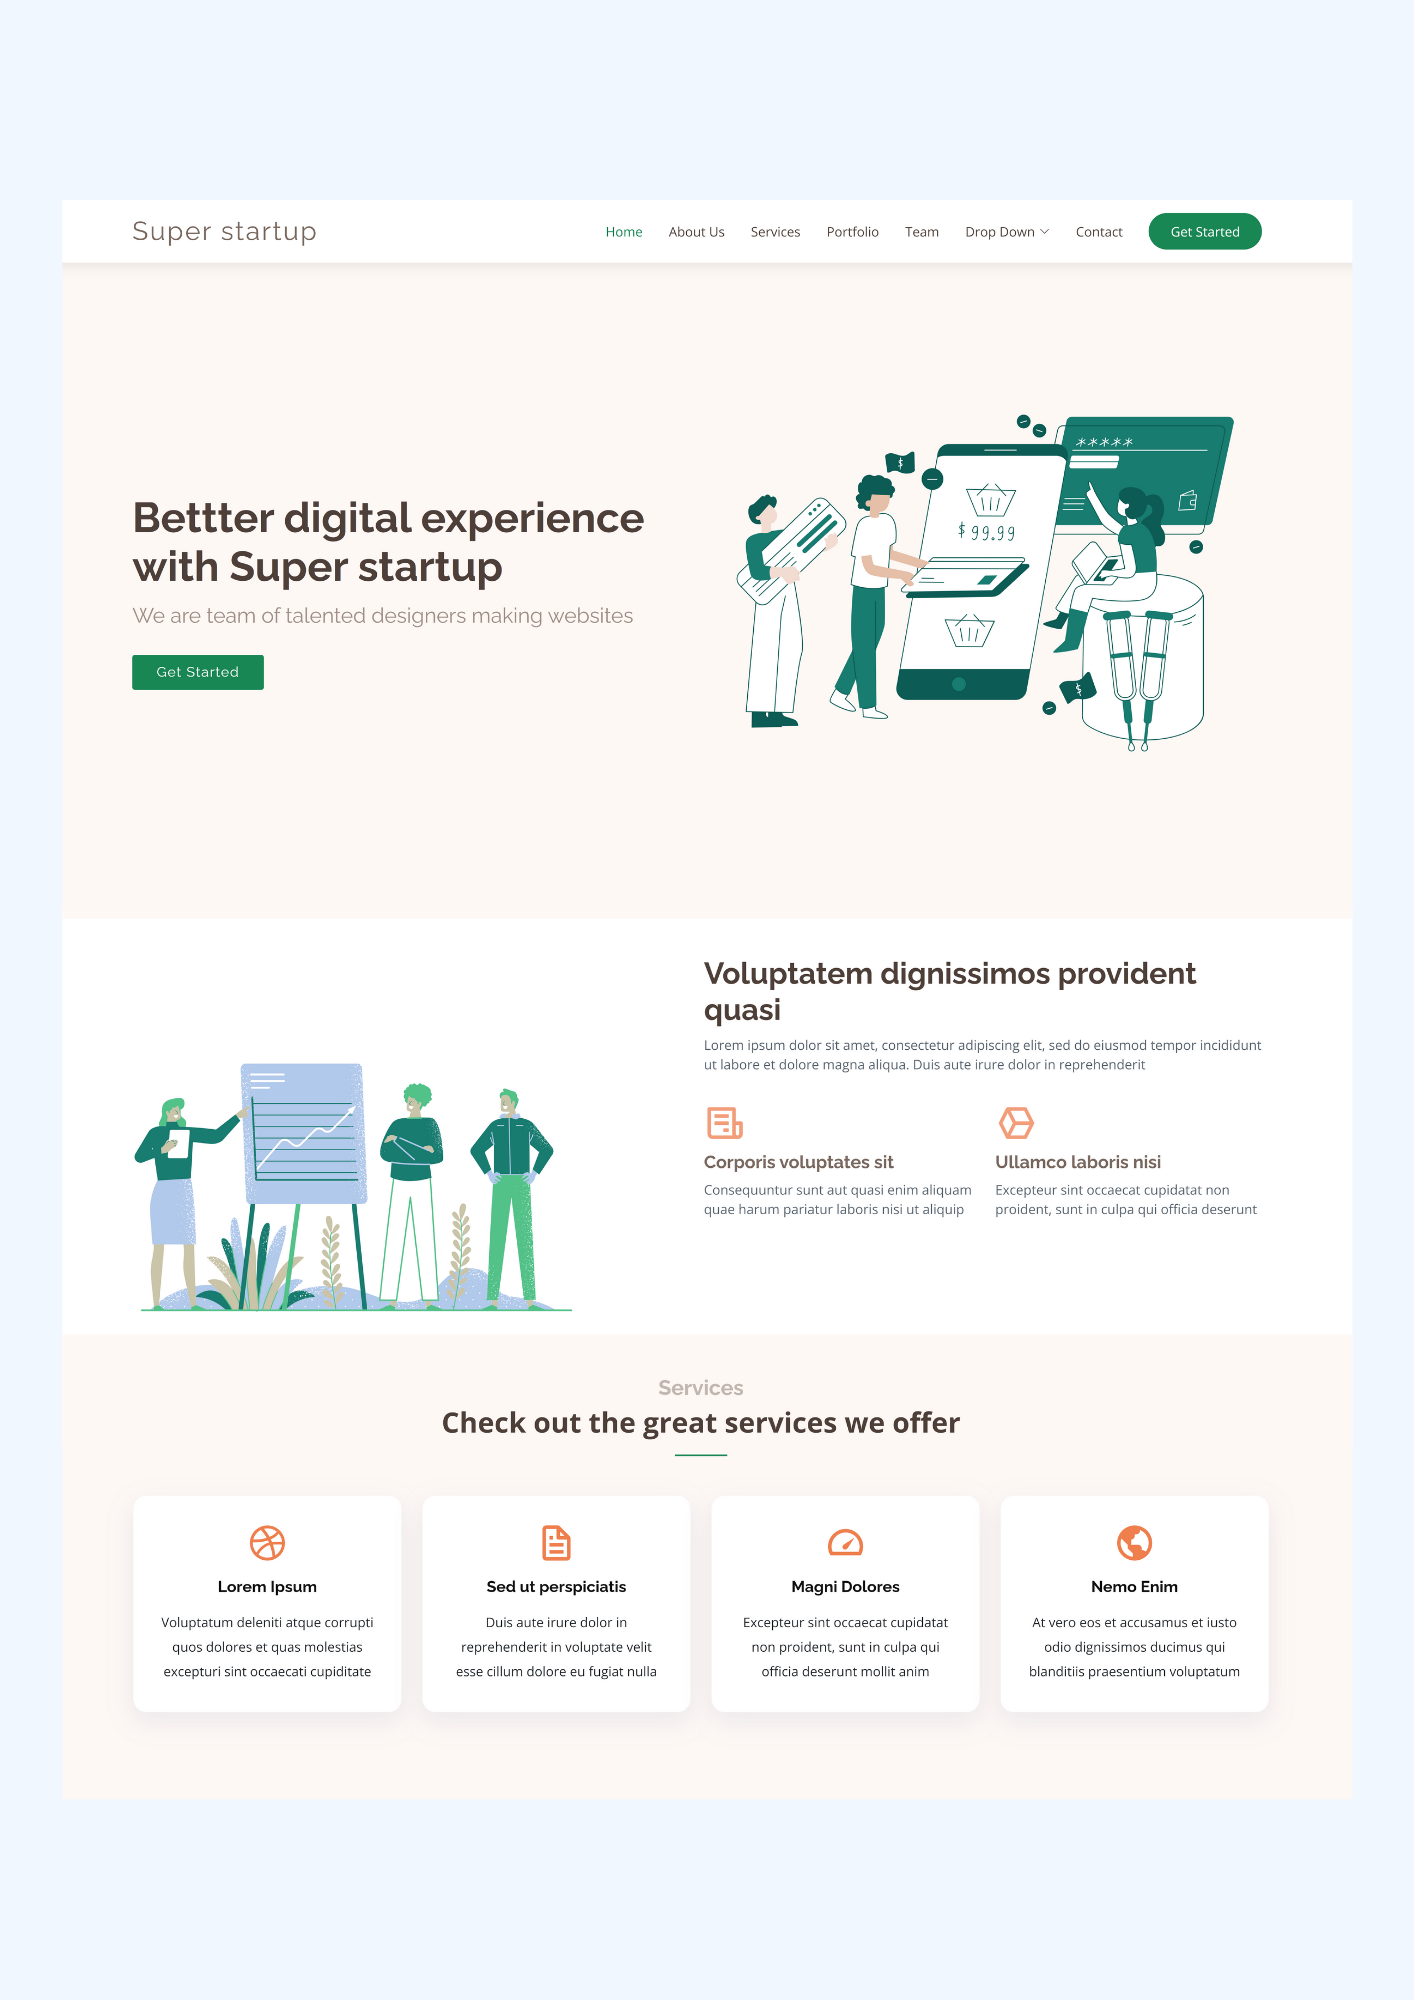 Super Startup is a modern Bootstrap template for your business, or startup company. We have included best practices and the latest trends in web development. Proudly designed by Reinhard Liem.